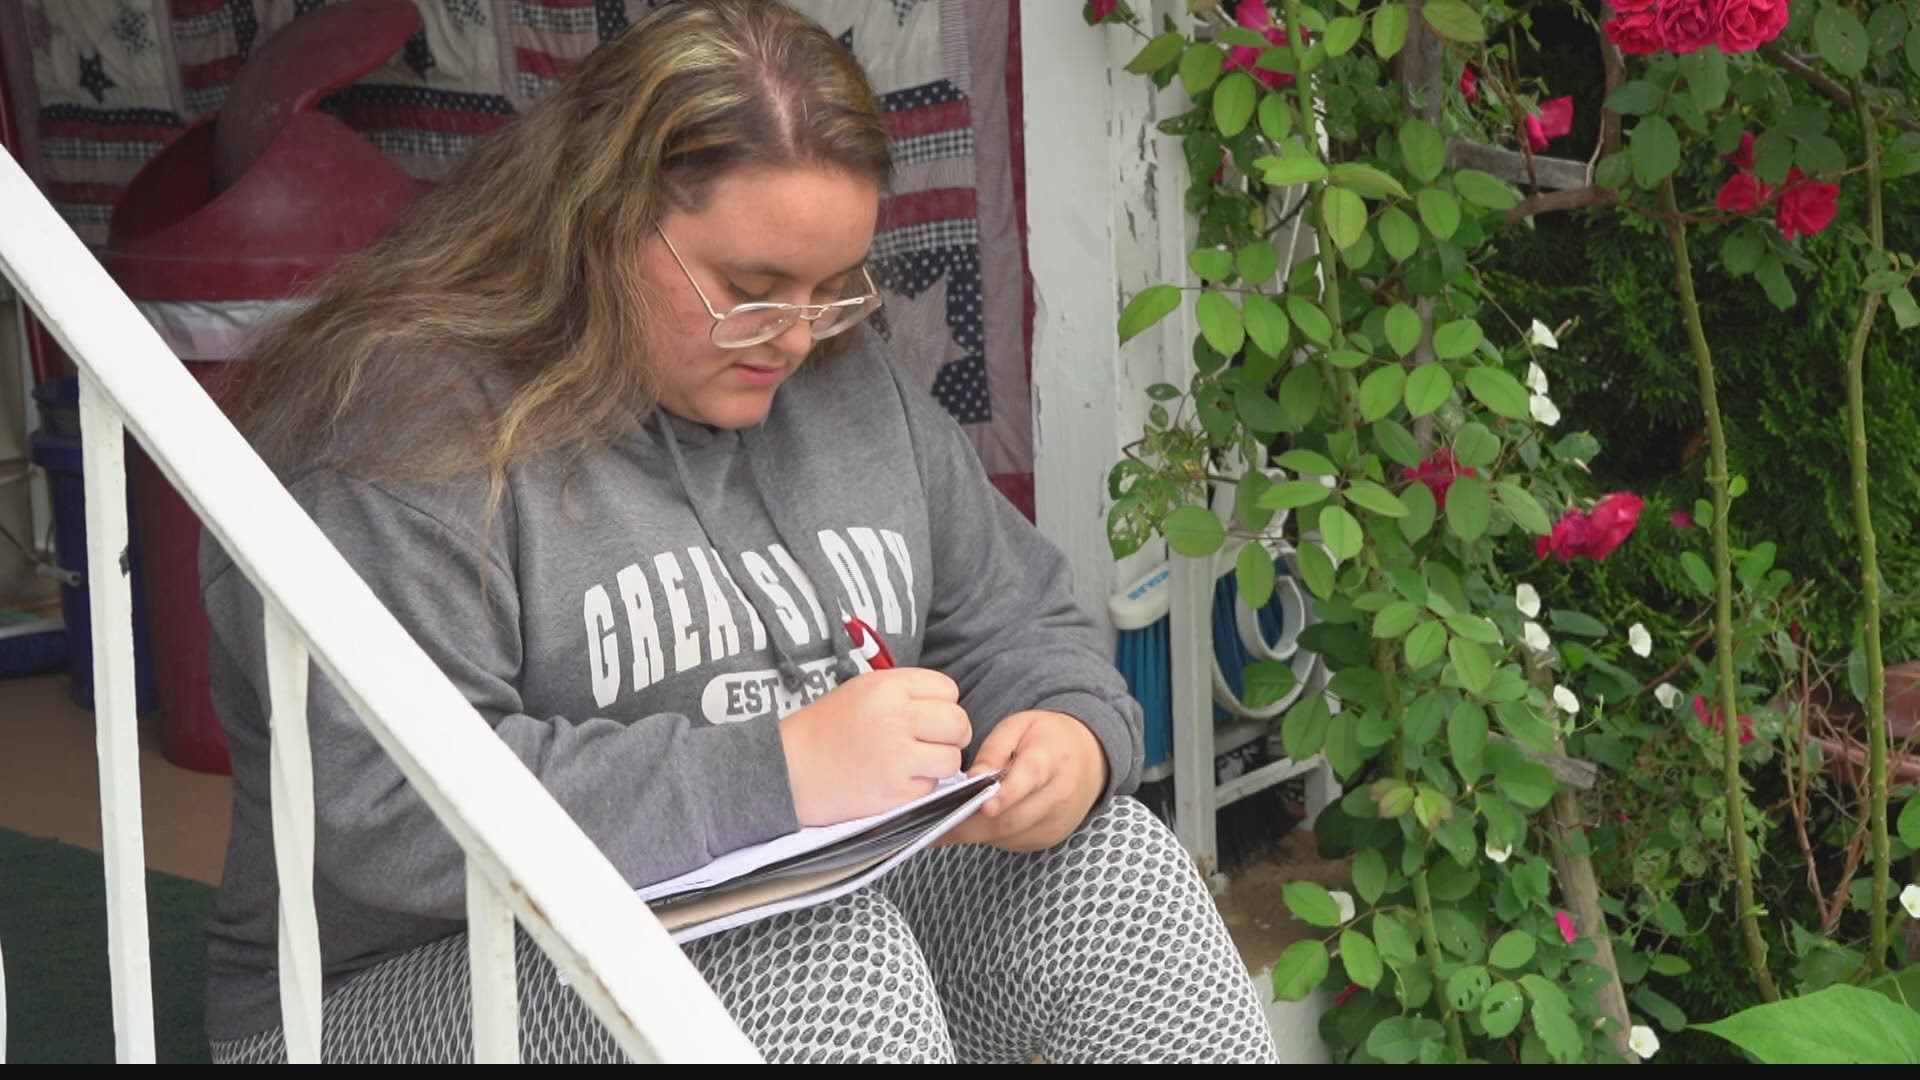 The past 18 years haven't been easy for Makayla Whyde, but she's the first in her family to graduate highs chool and now she's college bound.